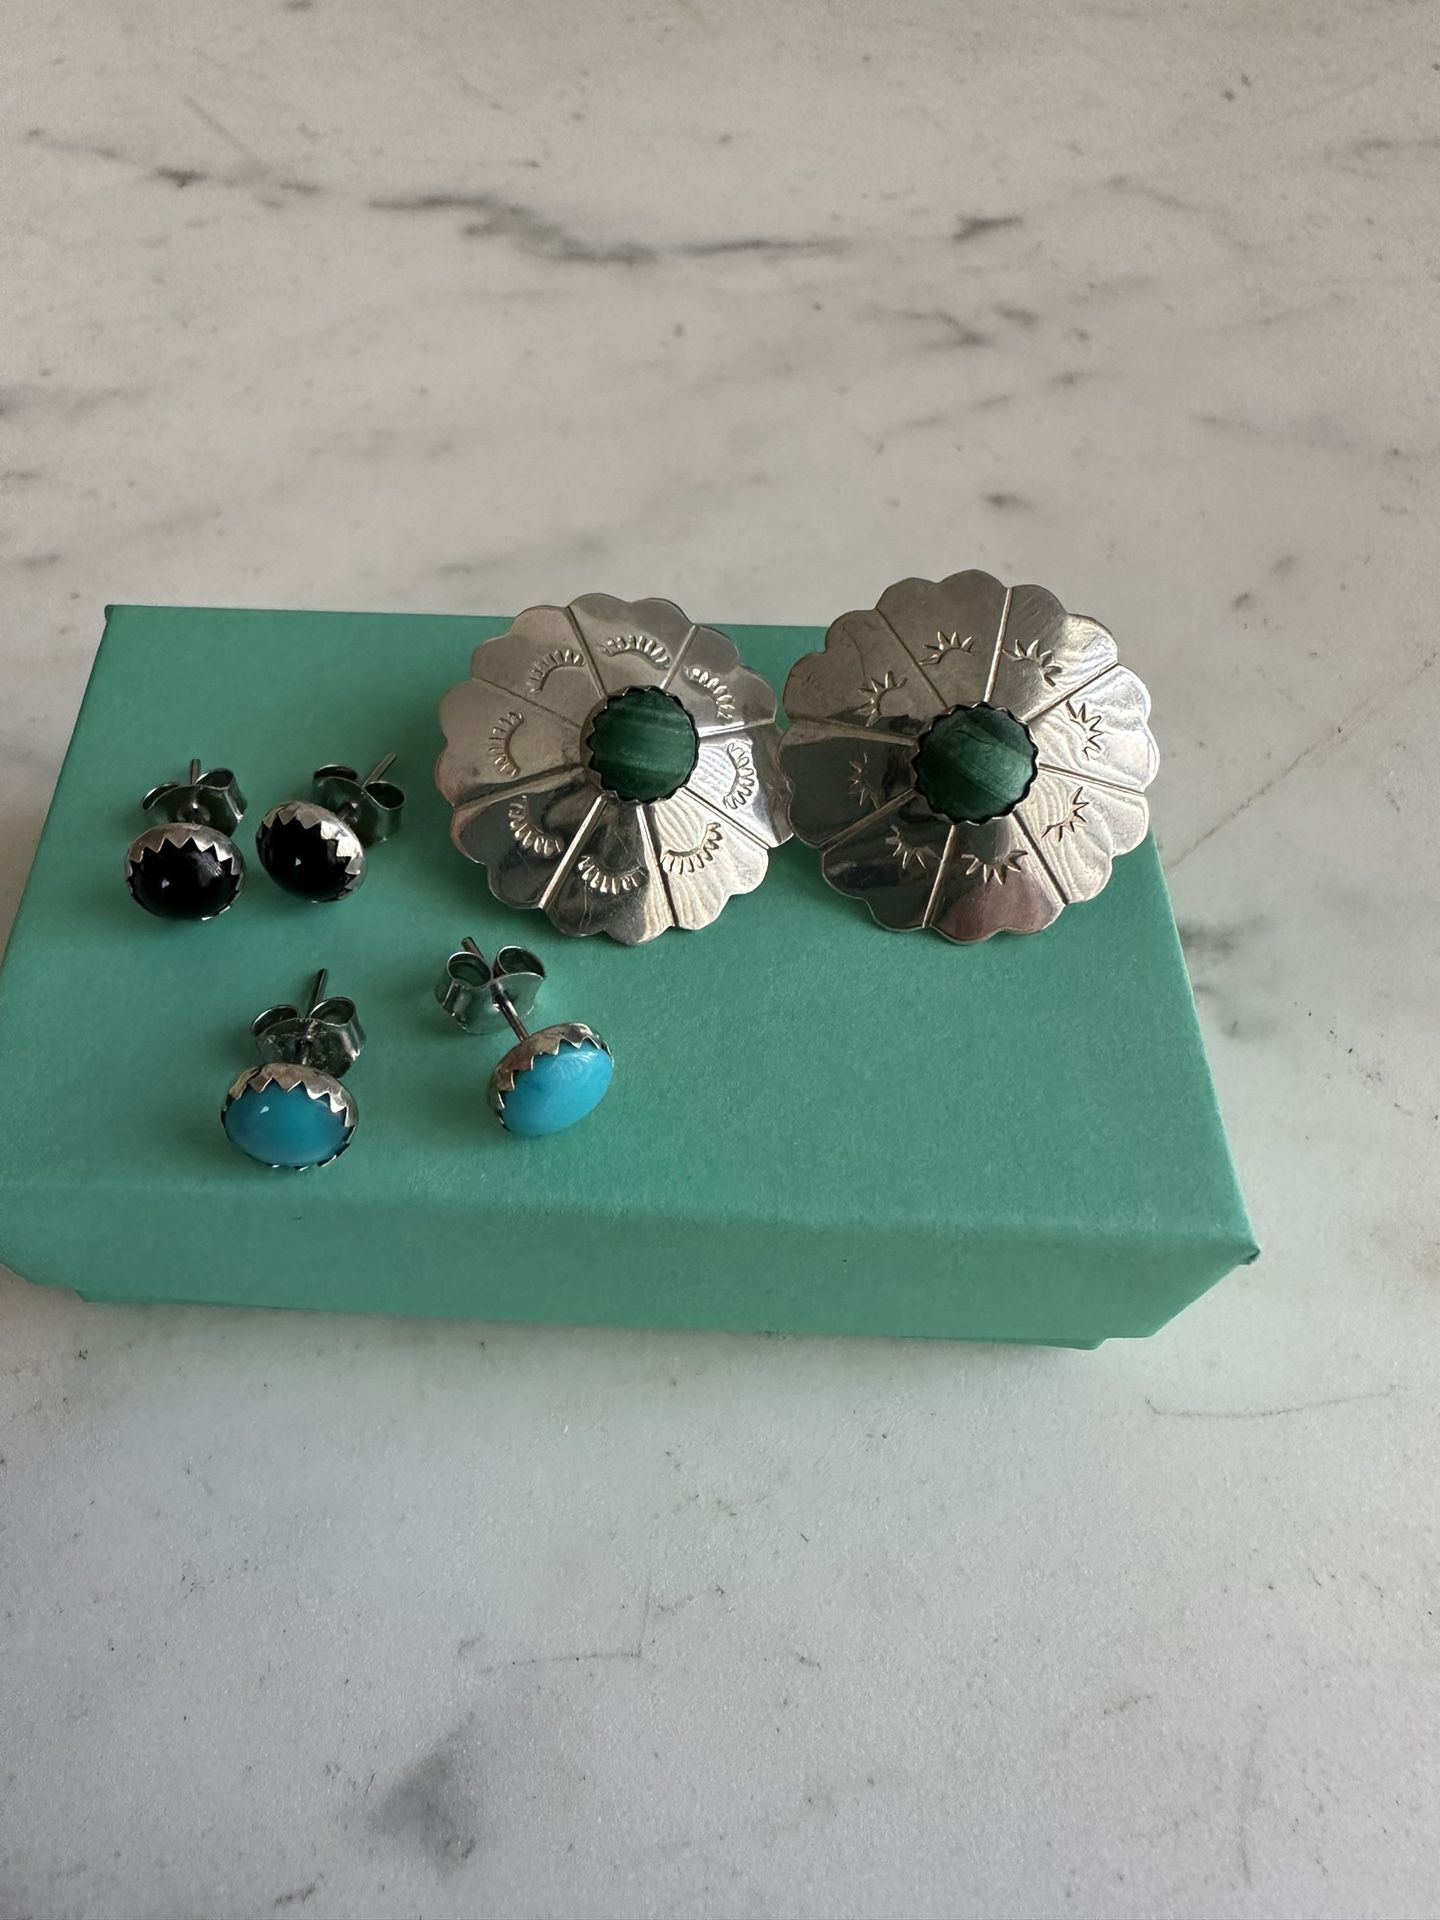 Vintage Sterling Silver Earring Set With Concho And 3 Genuine Studs, Malachite , Turquoise And Black Onyx